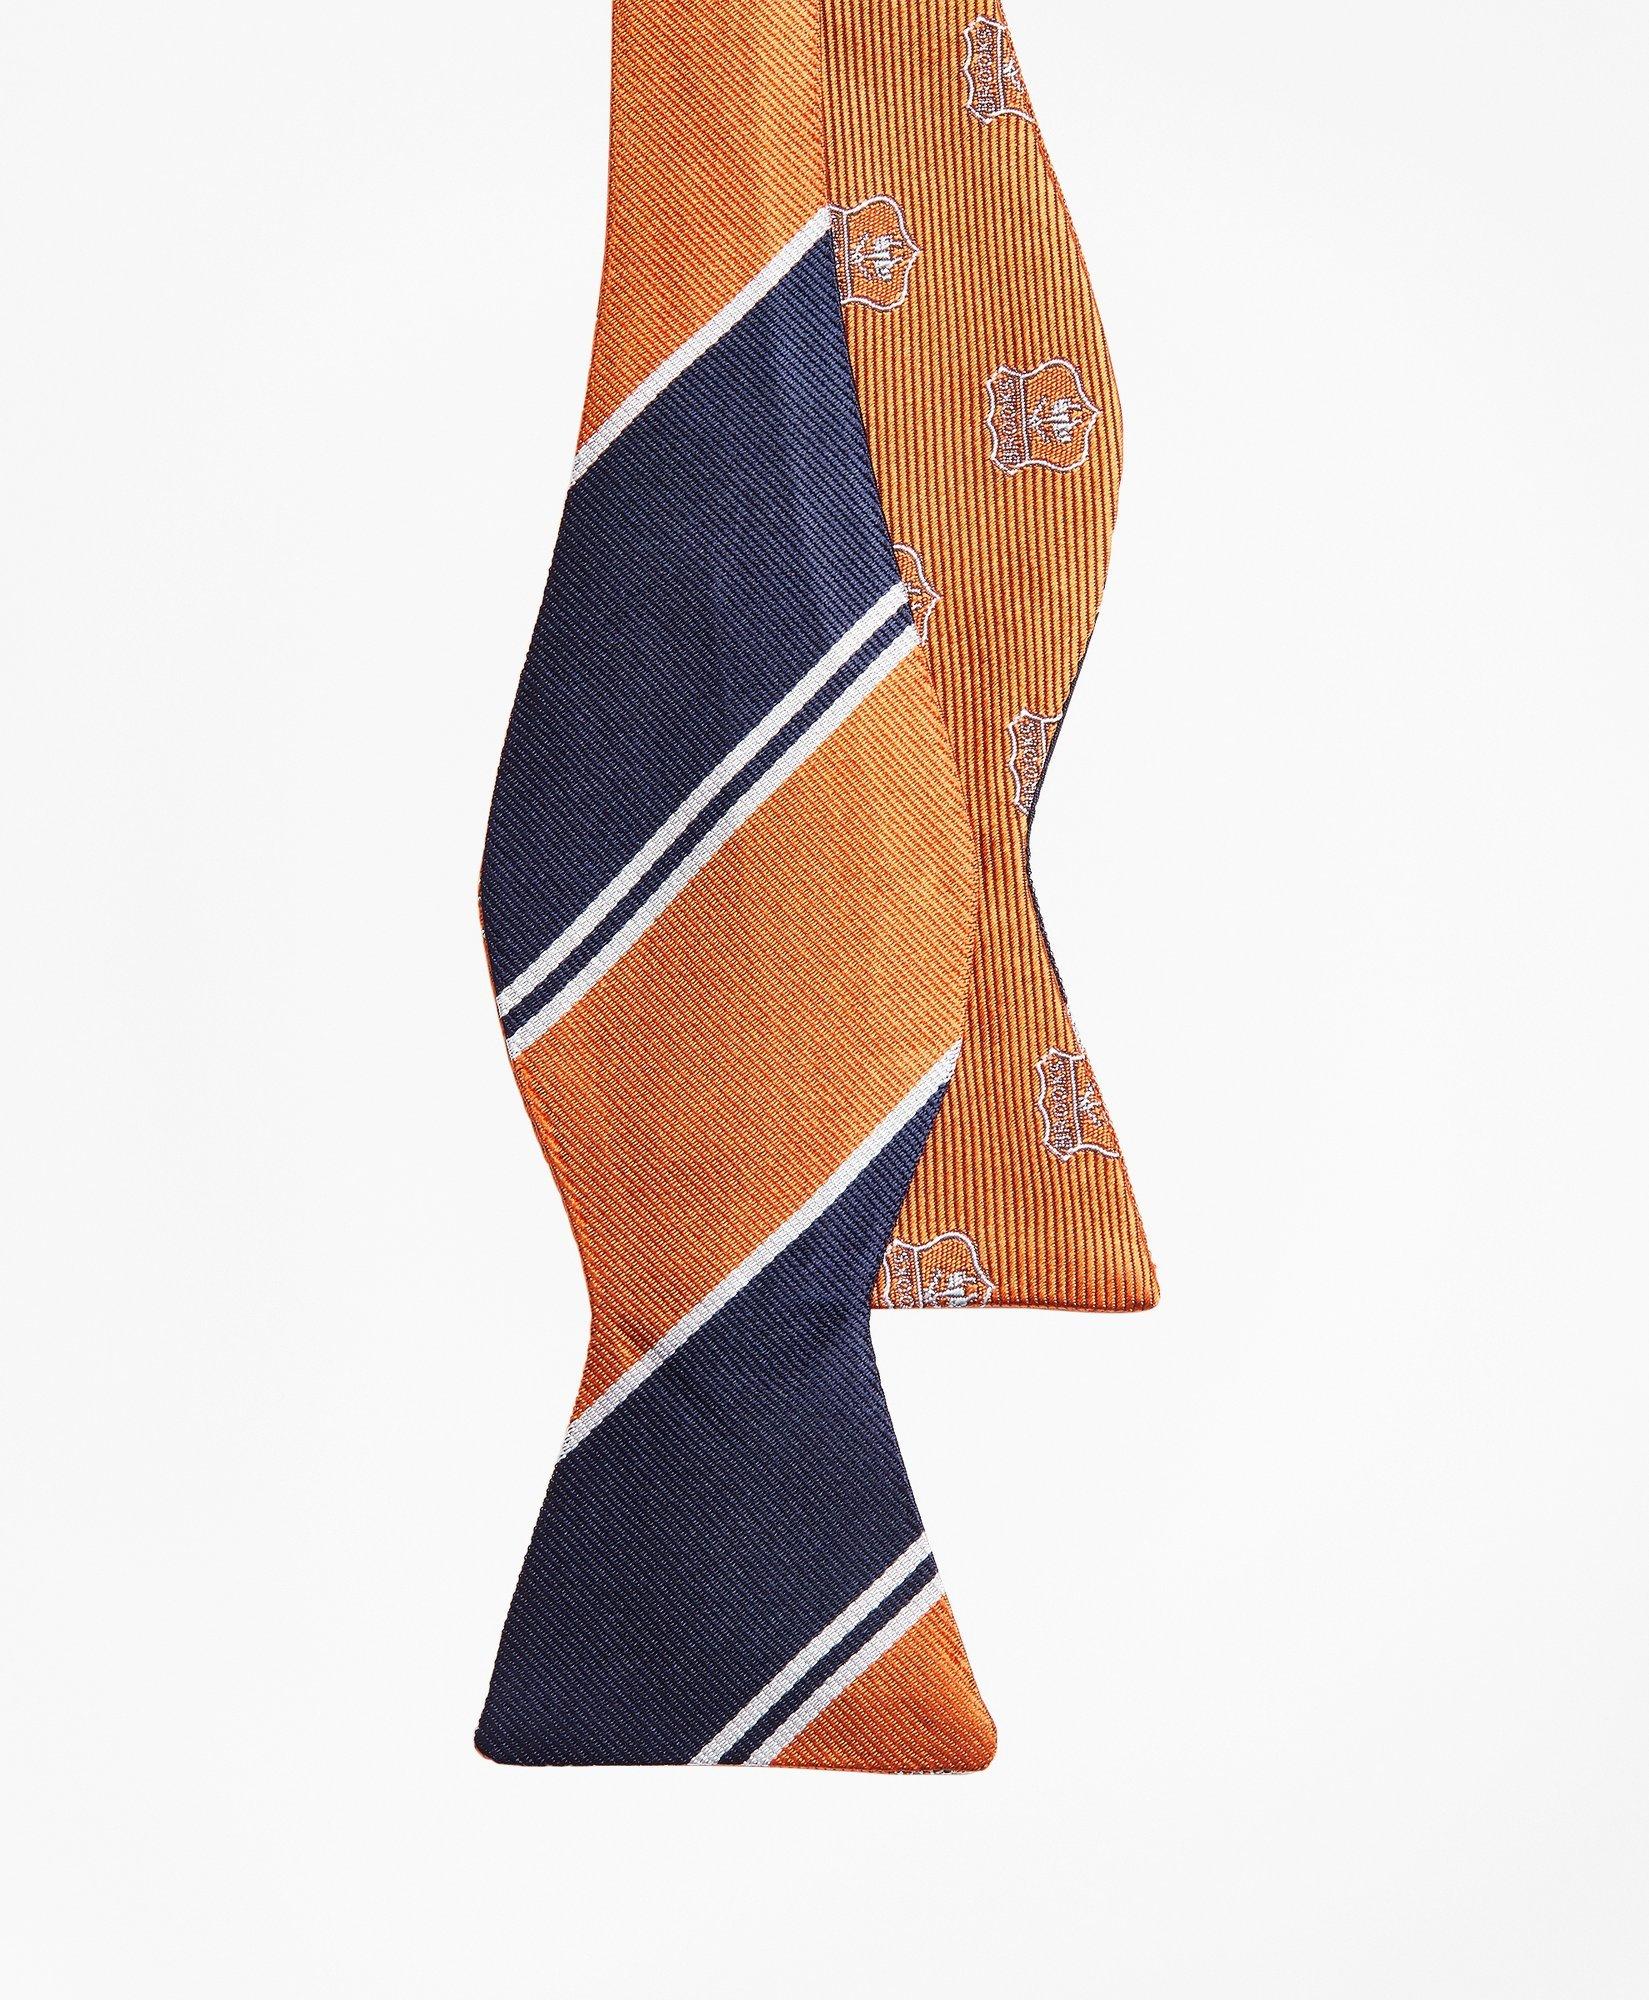 Crest with Stripe Reversible Bow Tie, image 2